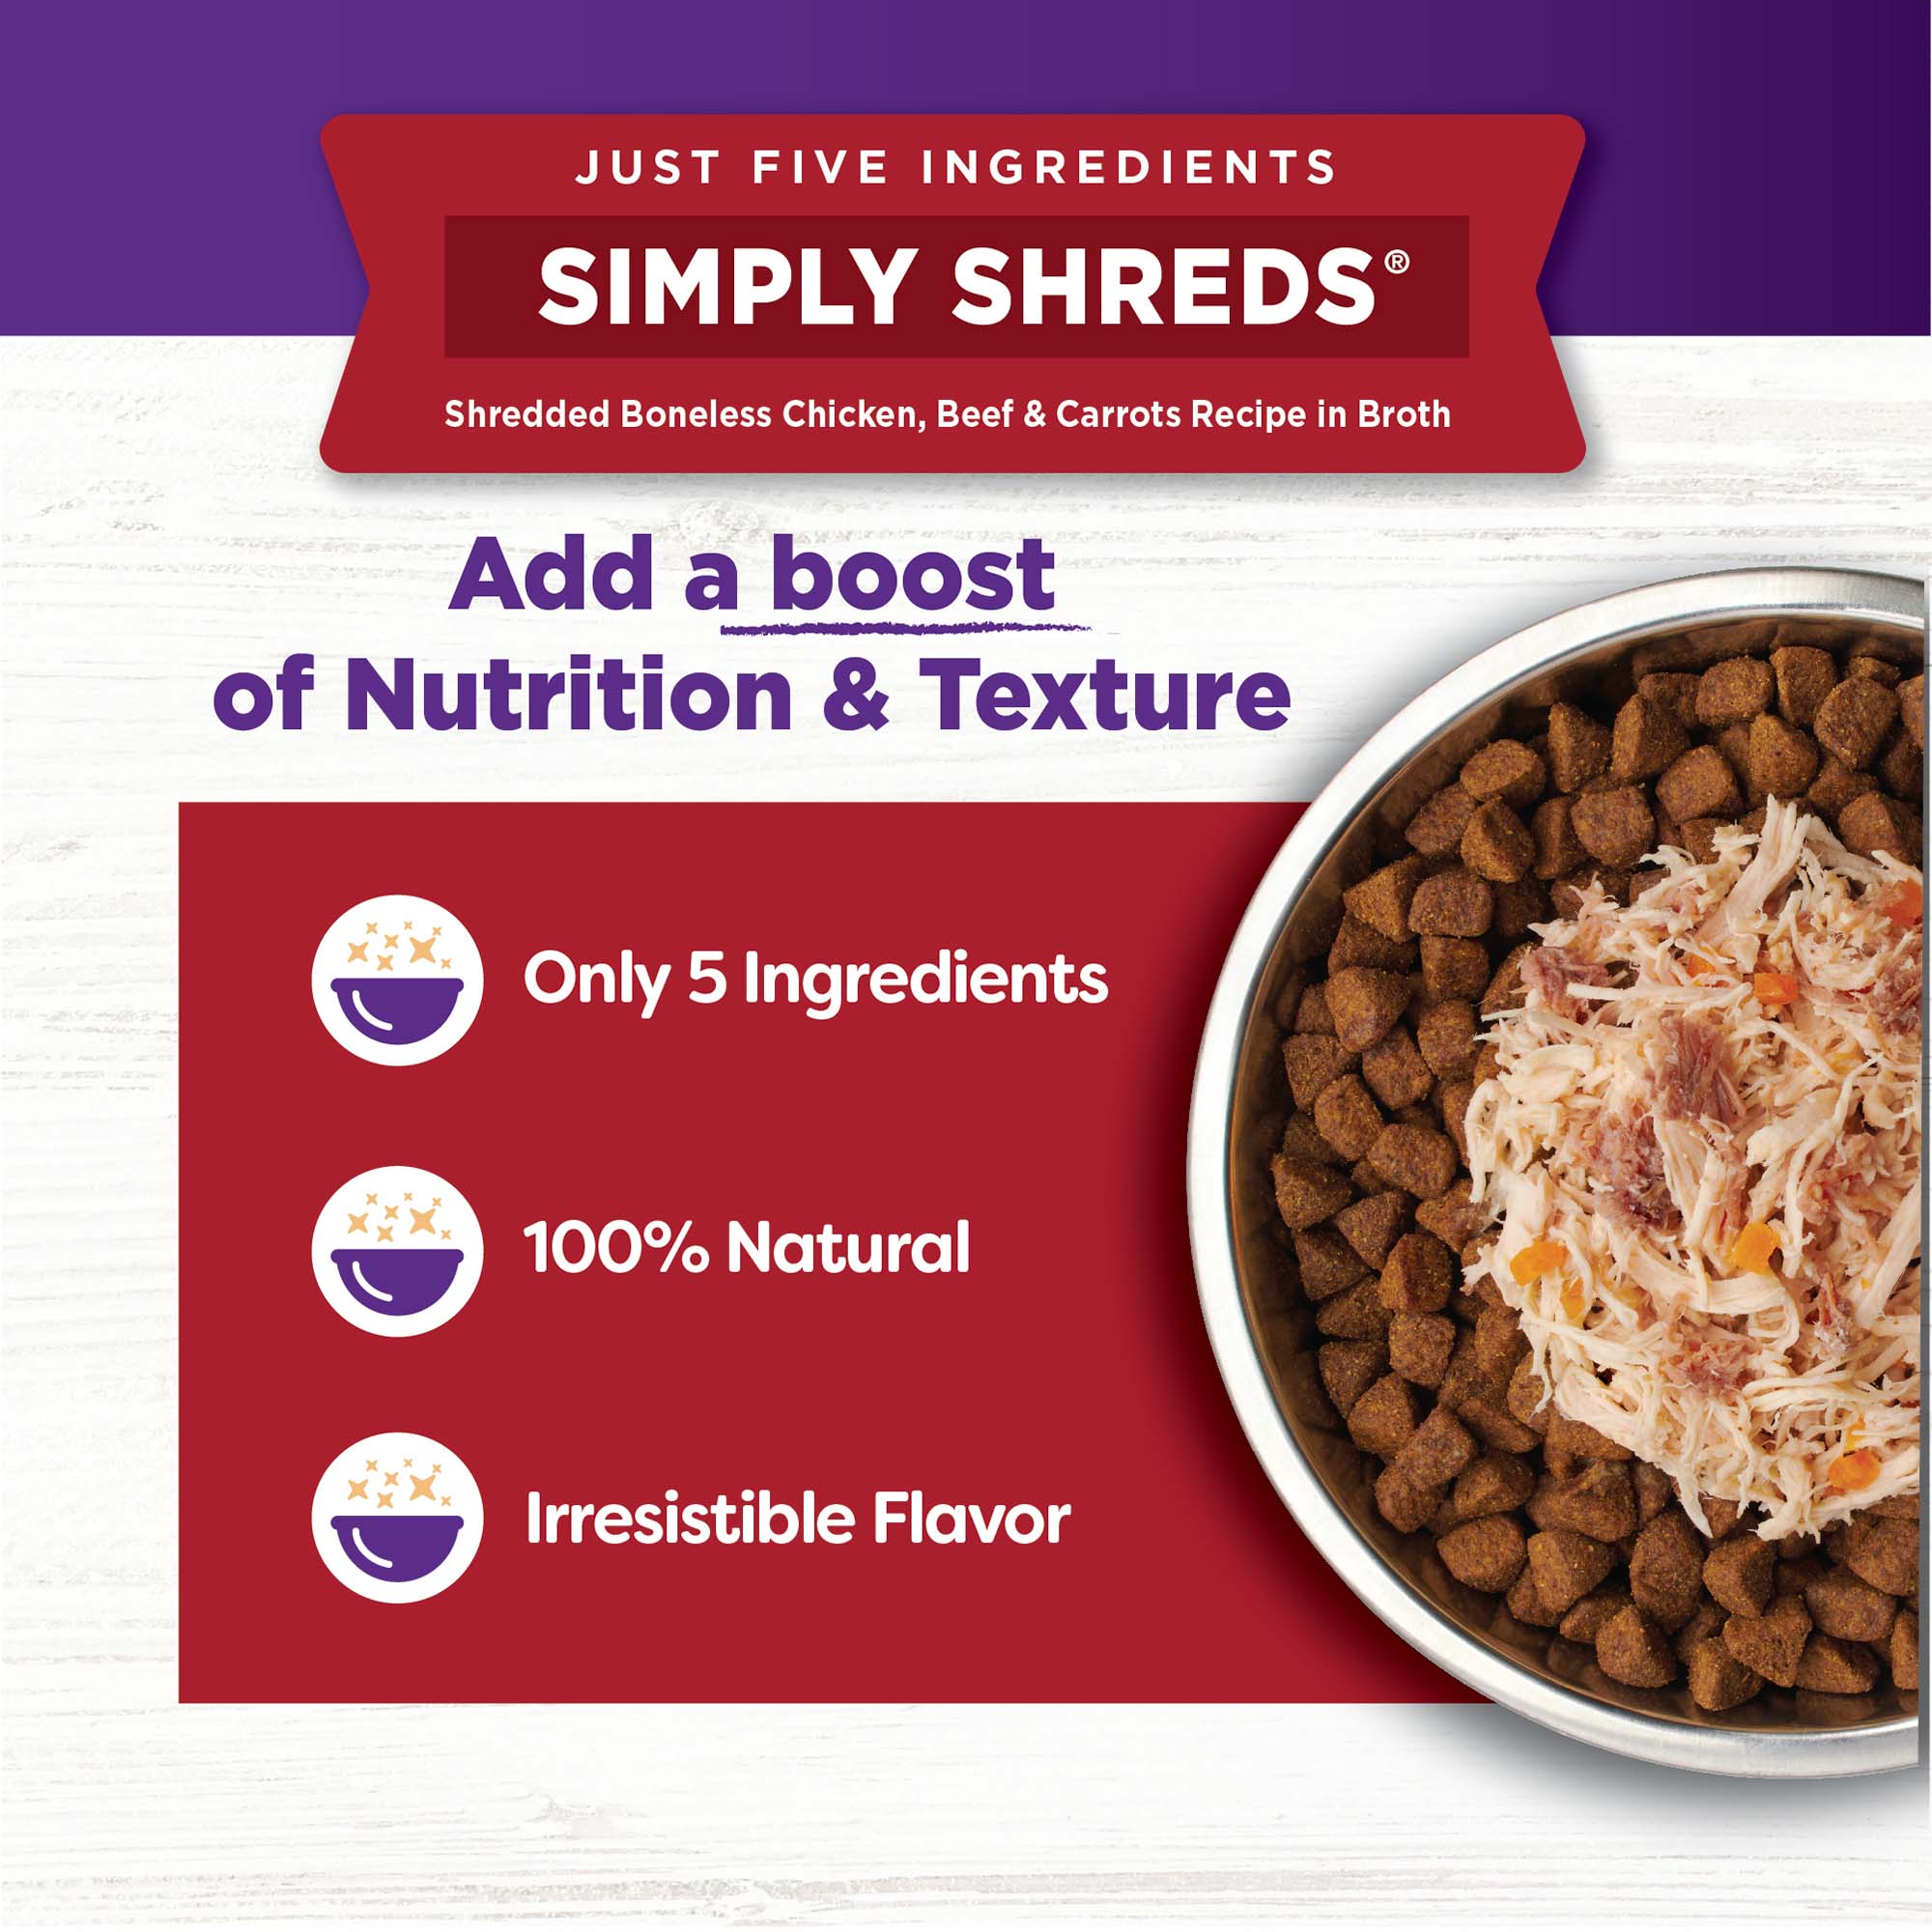 Wellness Bowl Boosters Simply Shreds Beef & Carrots